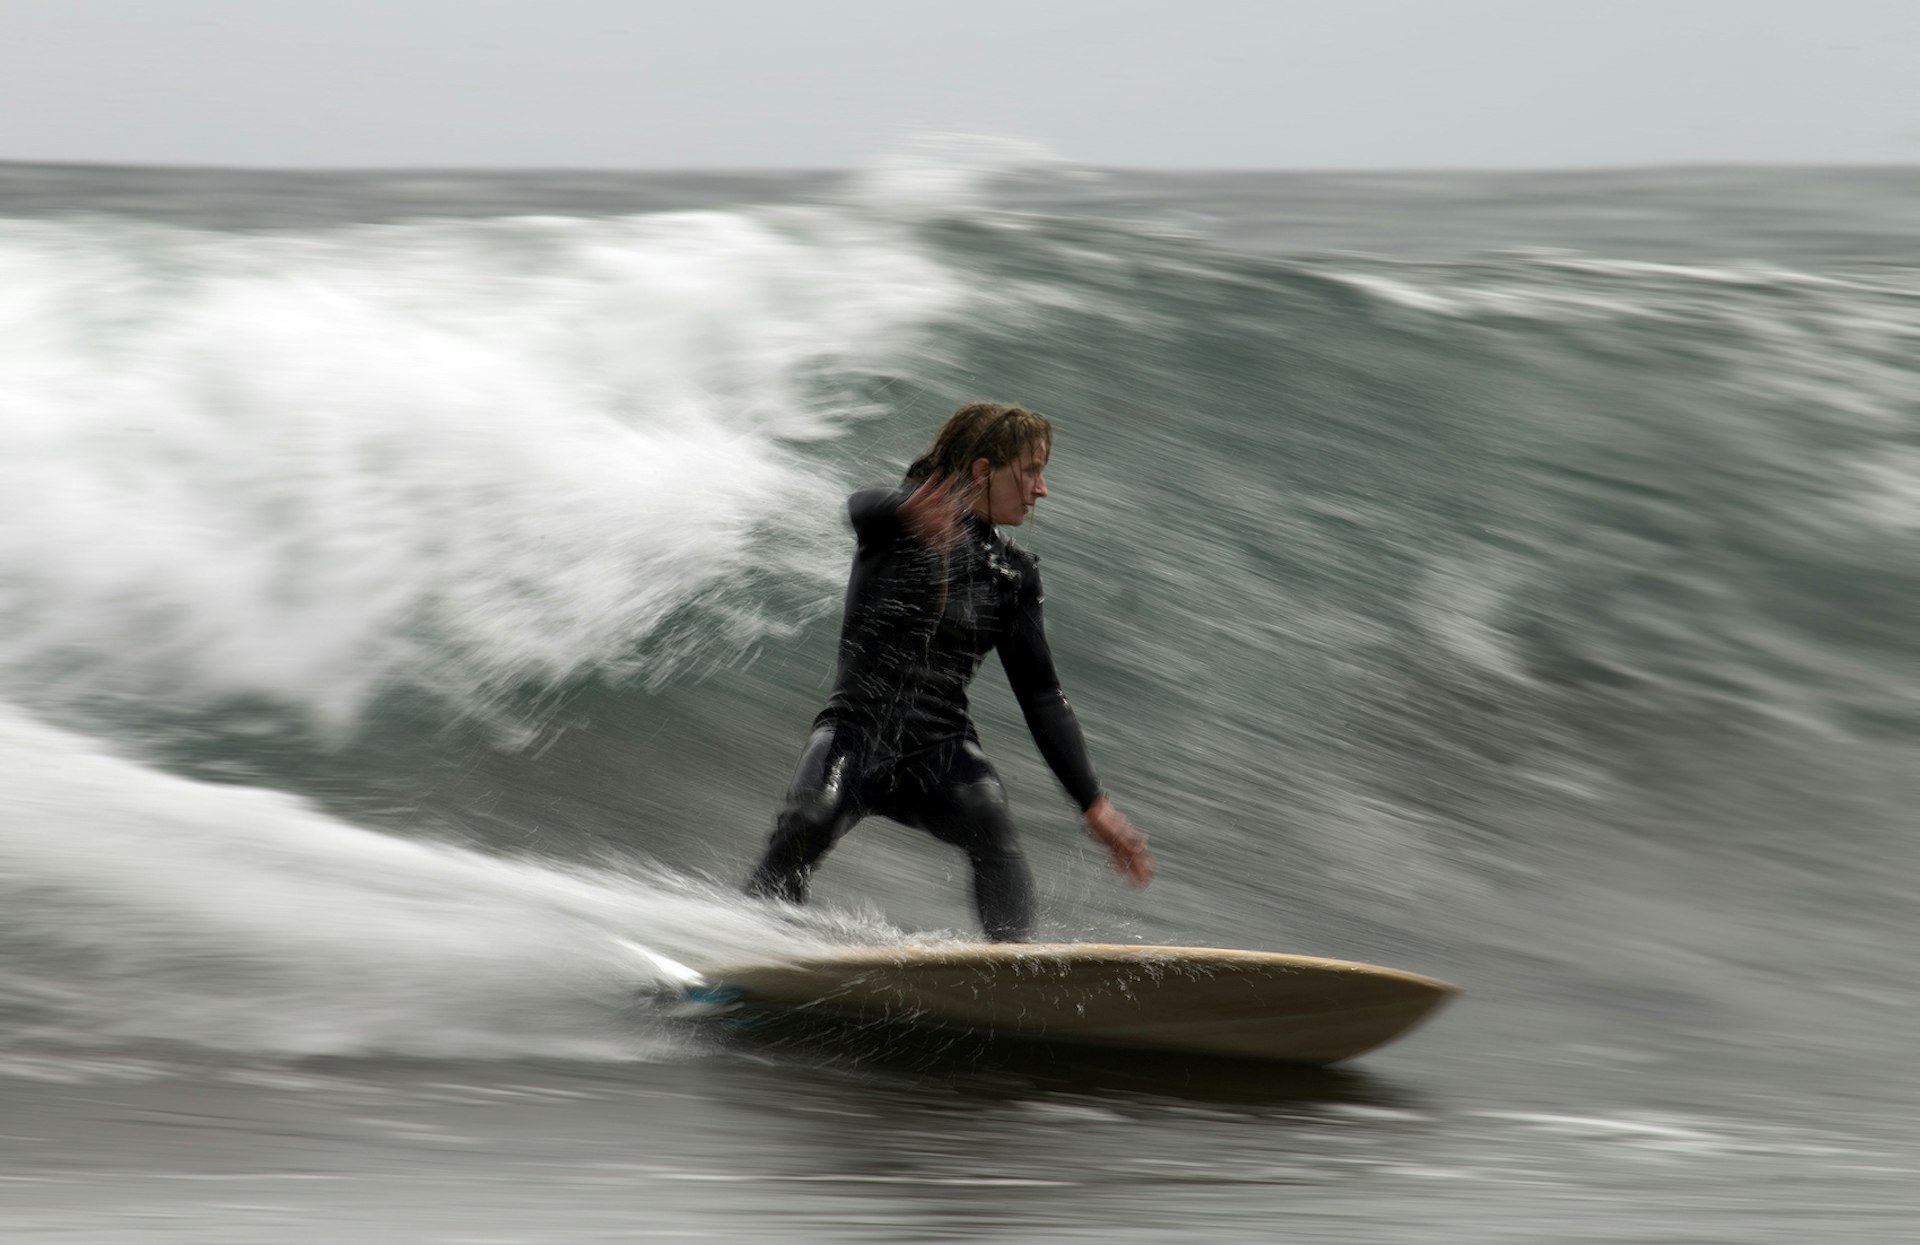 The film exposing surfing’s toxic supply chain